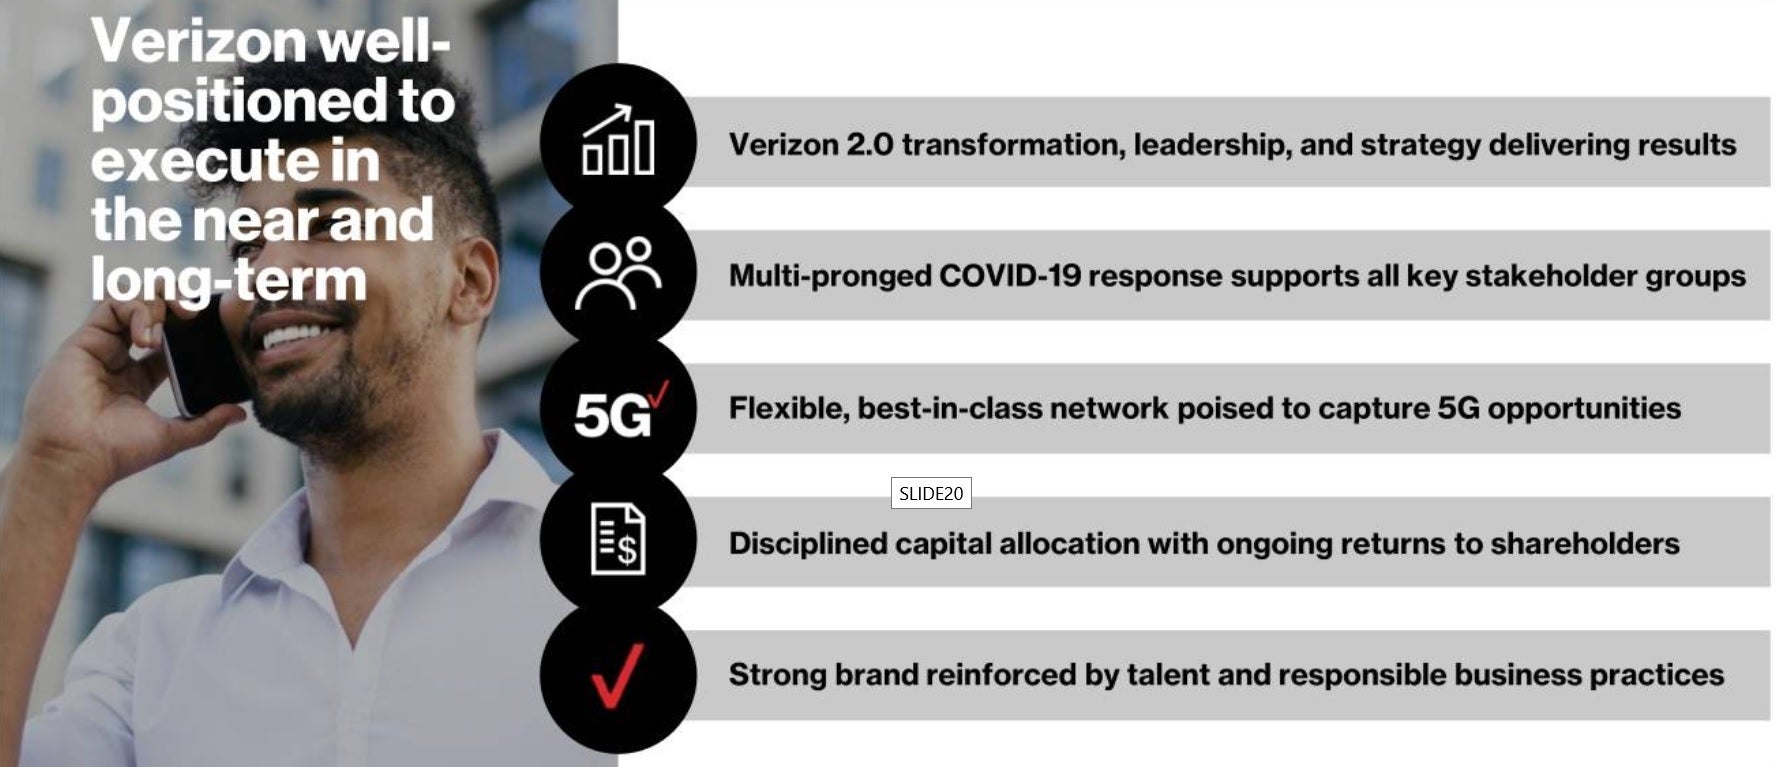 Verizon feels confident about its ability to execute in the near and long-term - With its 5G plans on track, Verizon reports a small Q1 decline in postpaid smarphone customers